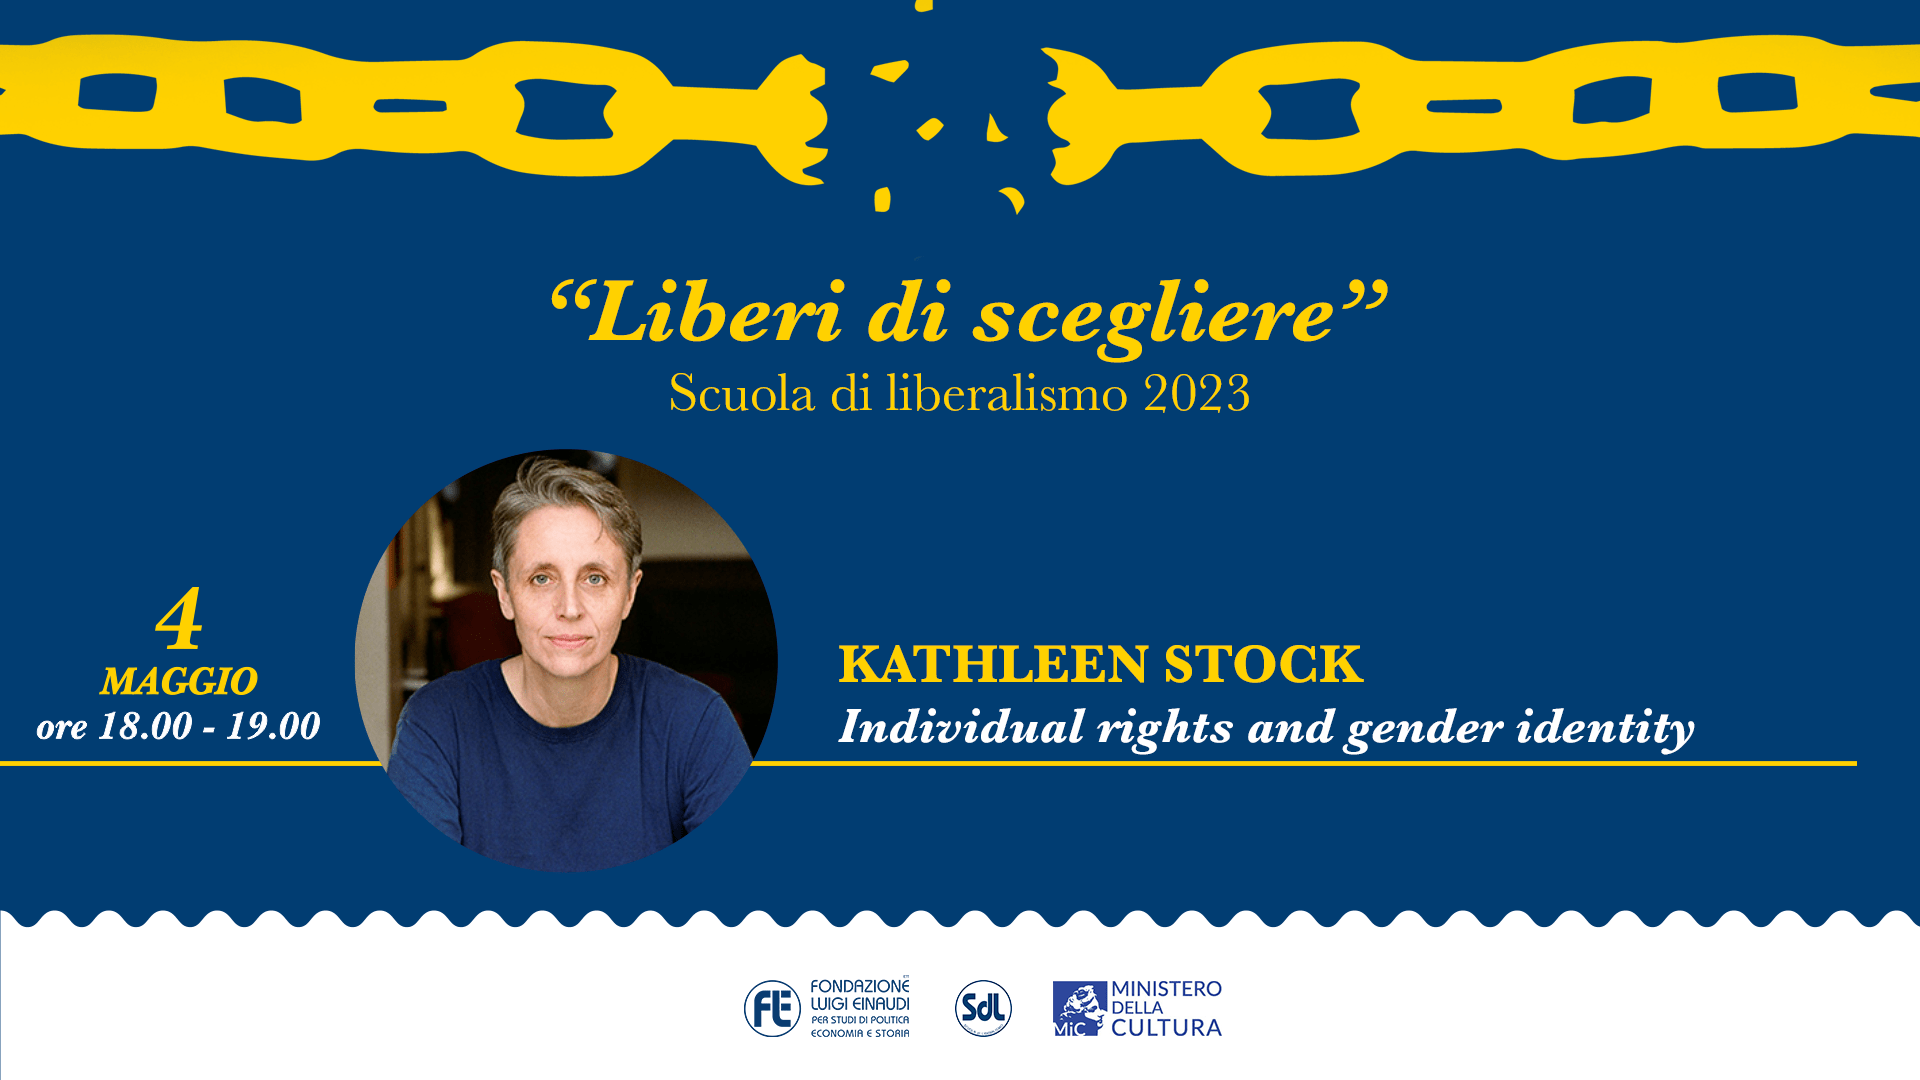 Scuola di Liberalismo 2023 – Kathleen Stock, Individual rights and gender identity